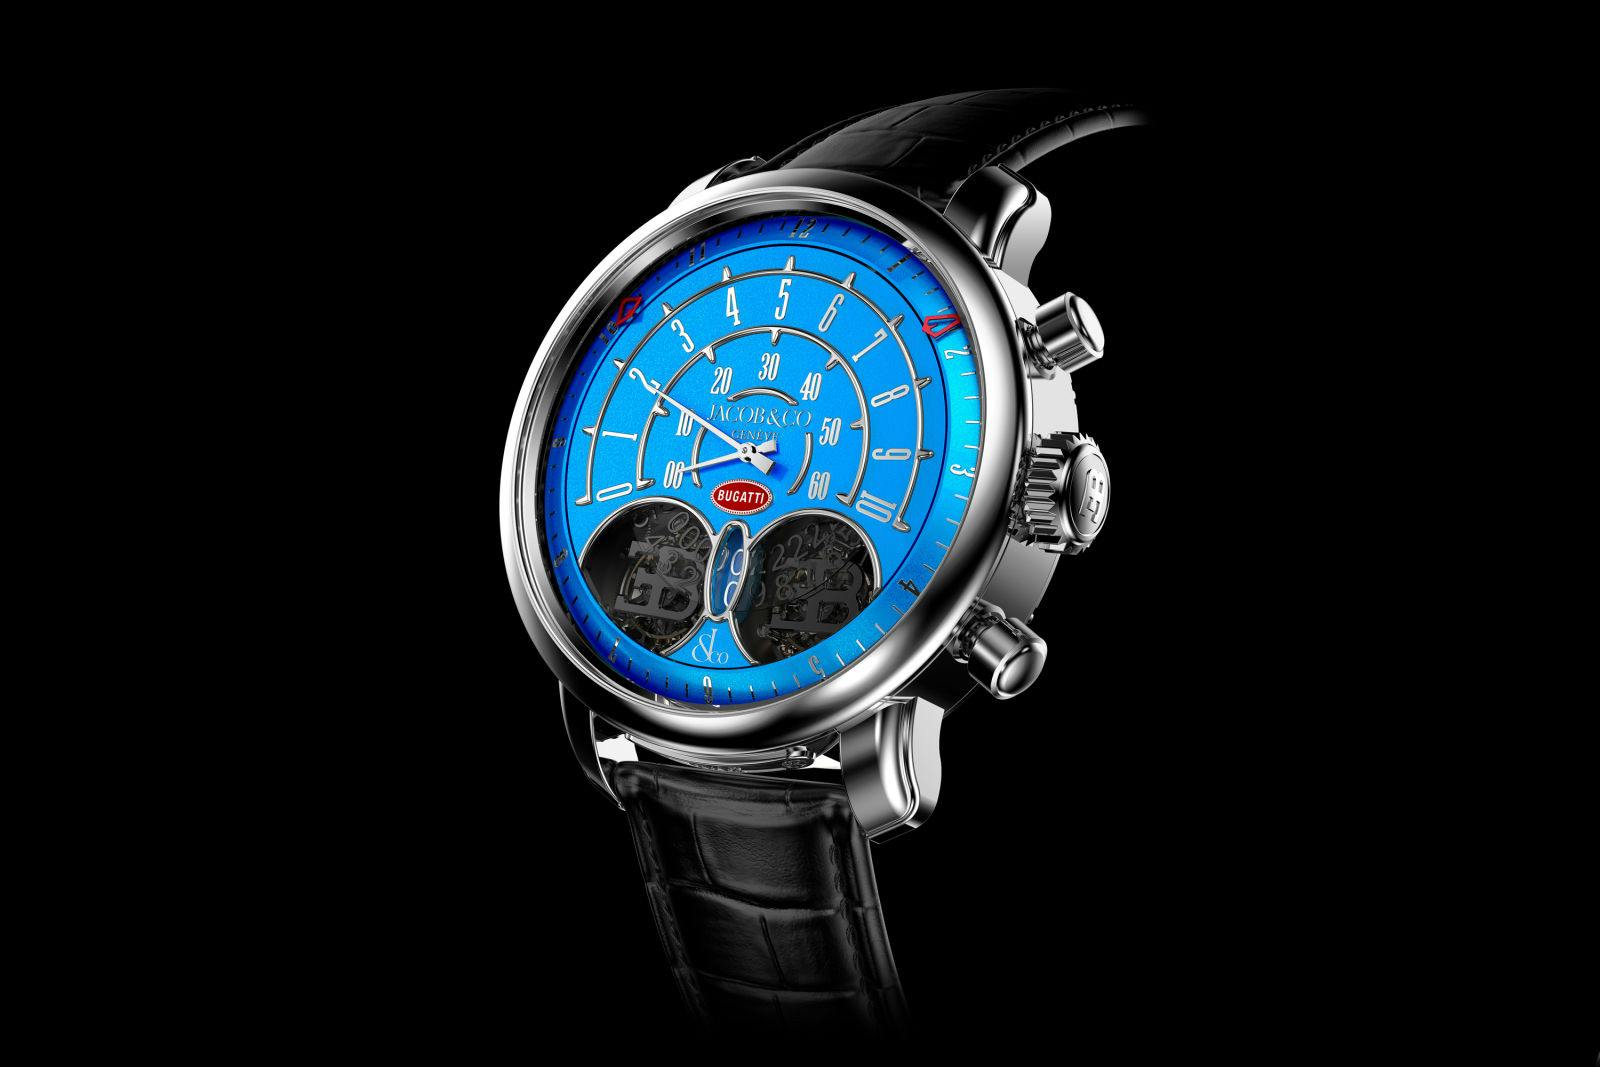 The 'Jean Bugatti' watch – the latest timepiece to be born out of the partnership between Jacob & Co. and Bugatti.